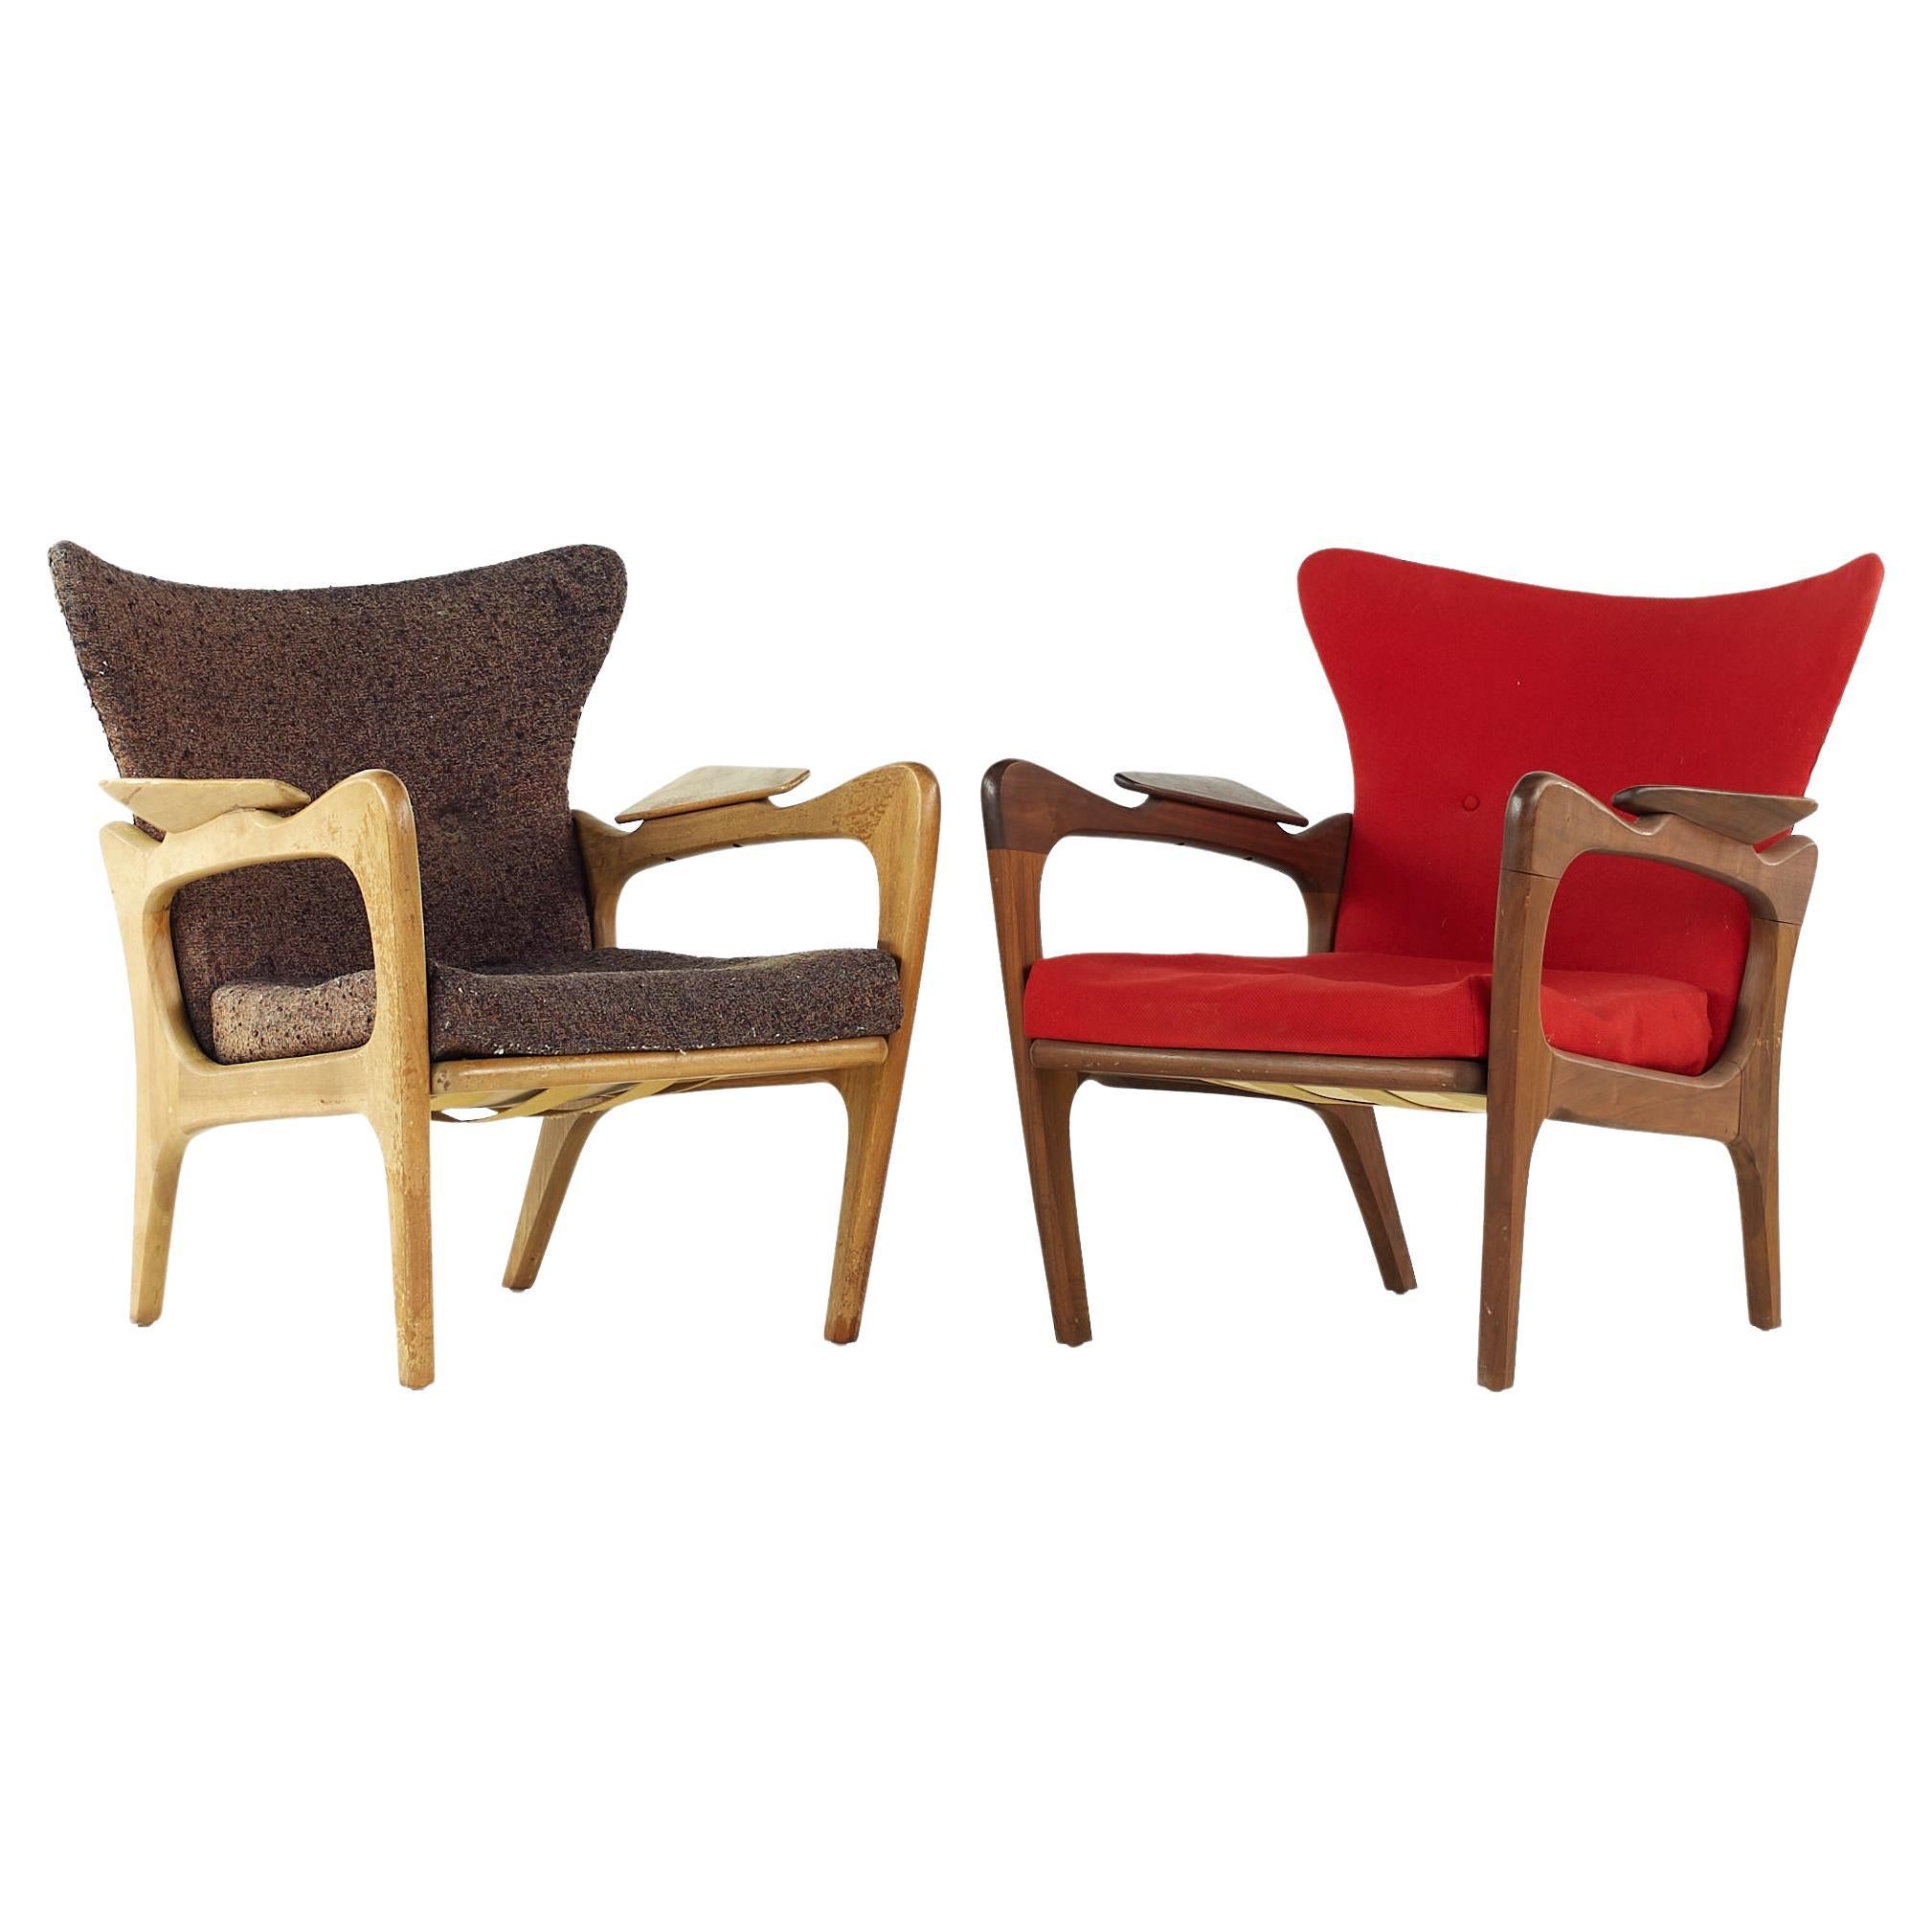 Adrian Pearsall for Craft Associates Mid Century Lounge Chair - Pair